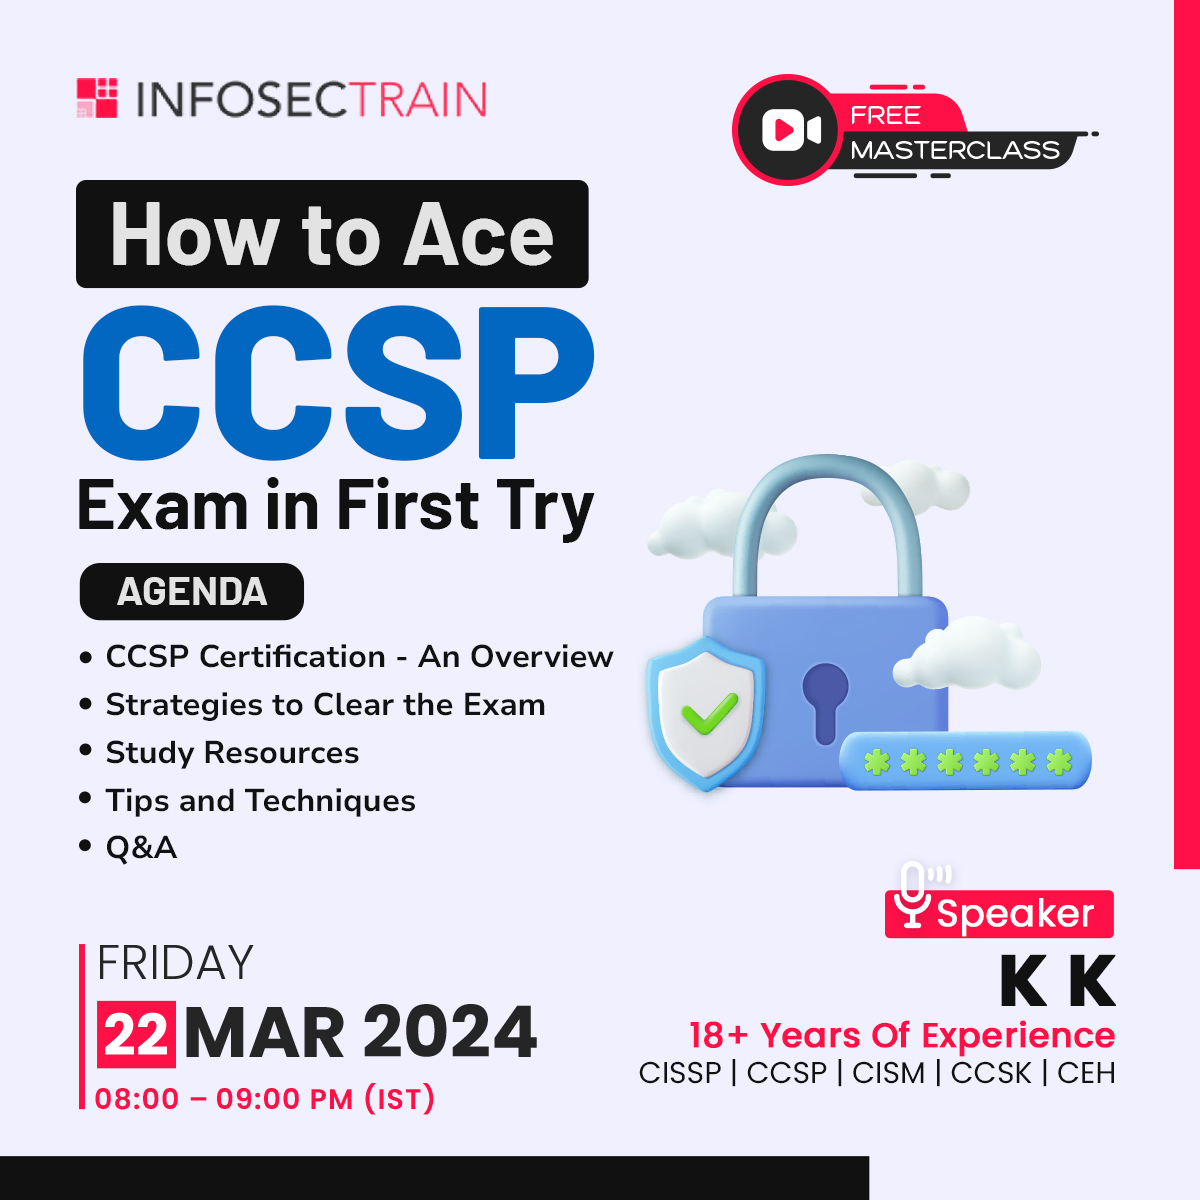 How to Ace CCSP Exam in First Try, Online Event